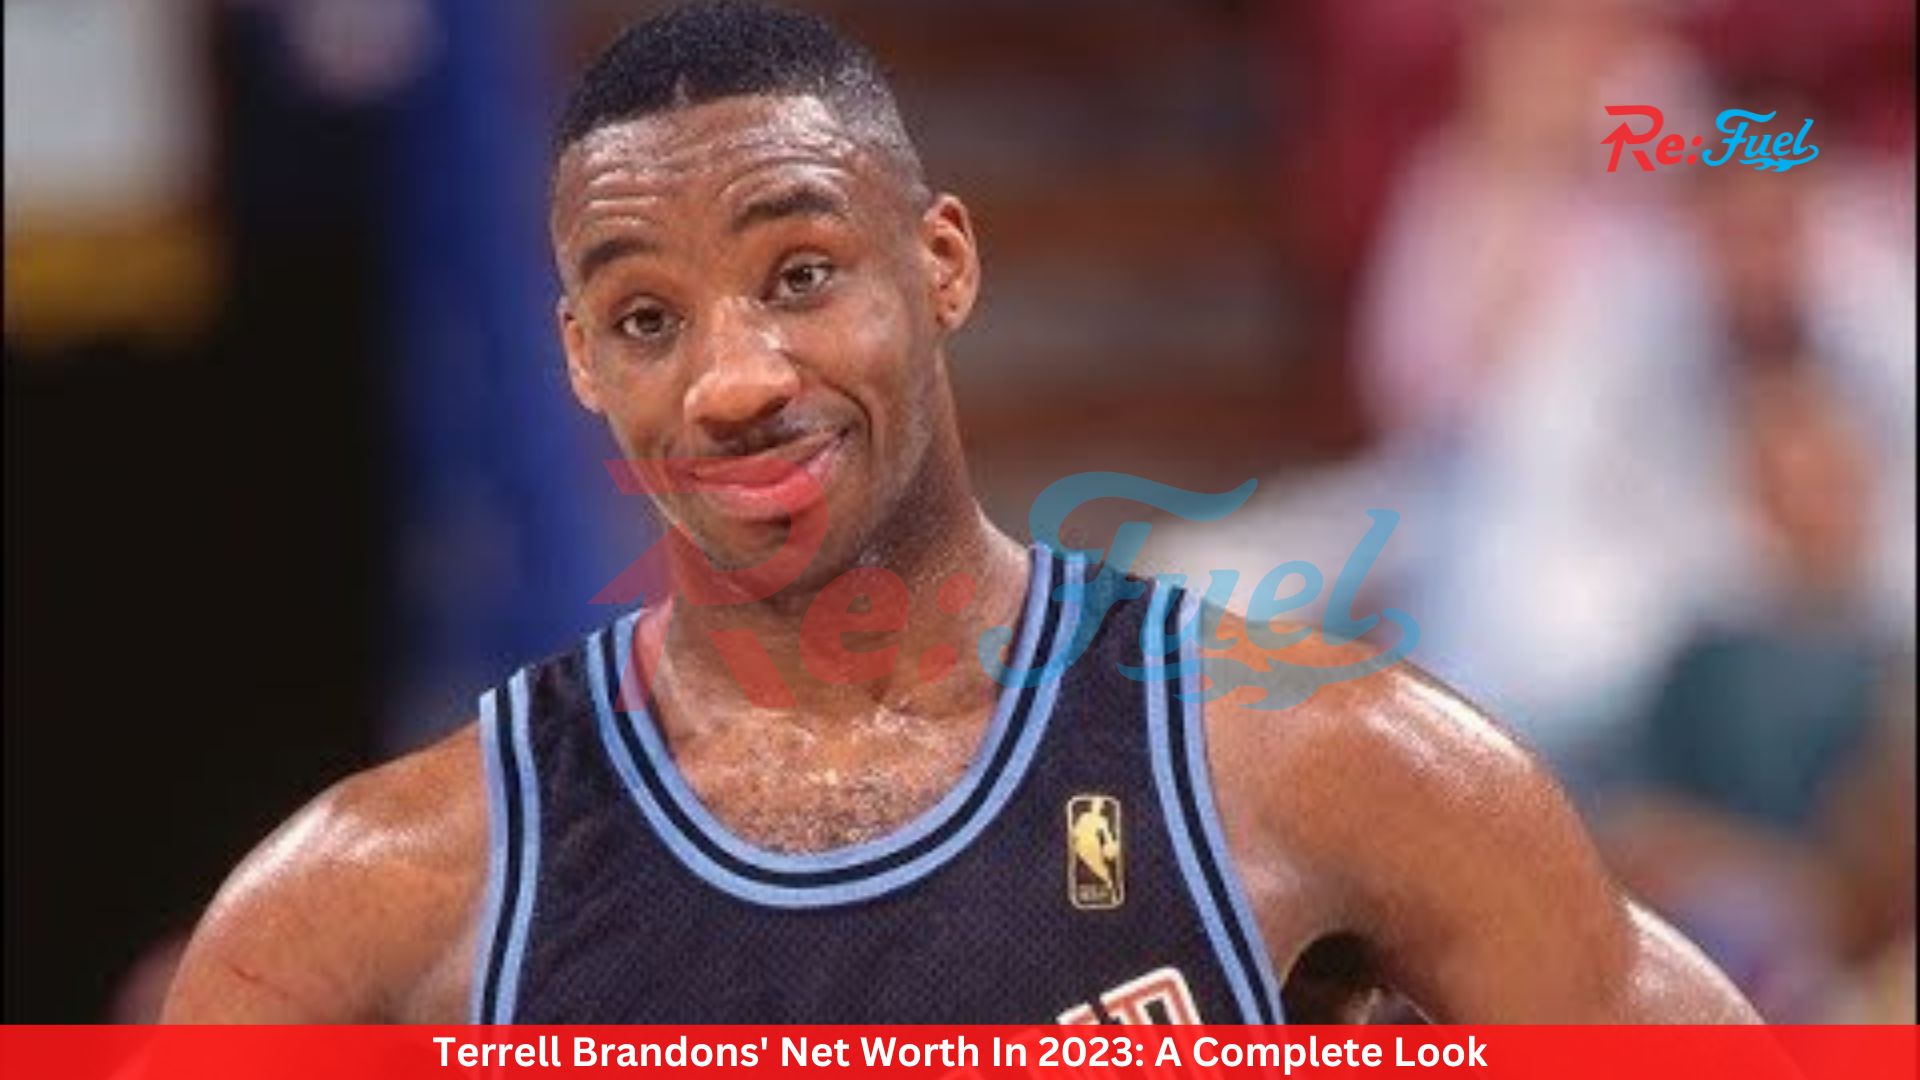 Terrell Brandon's Net Worth In 2023: A Complete Look